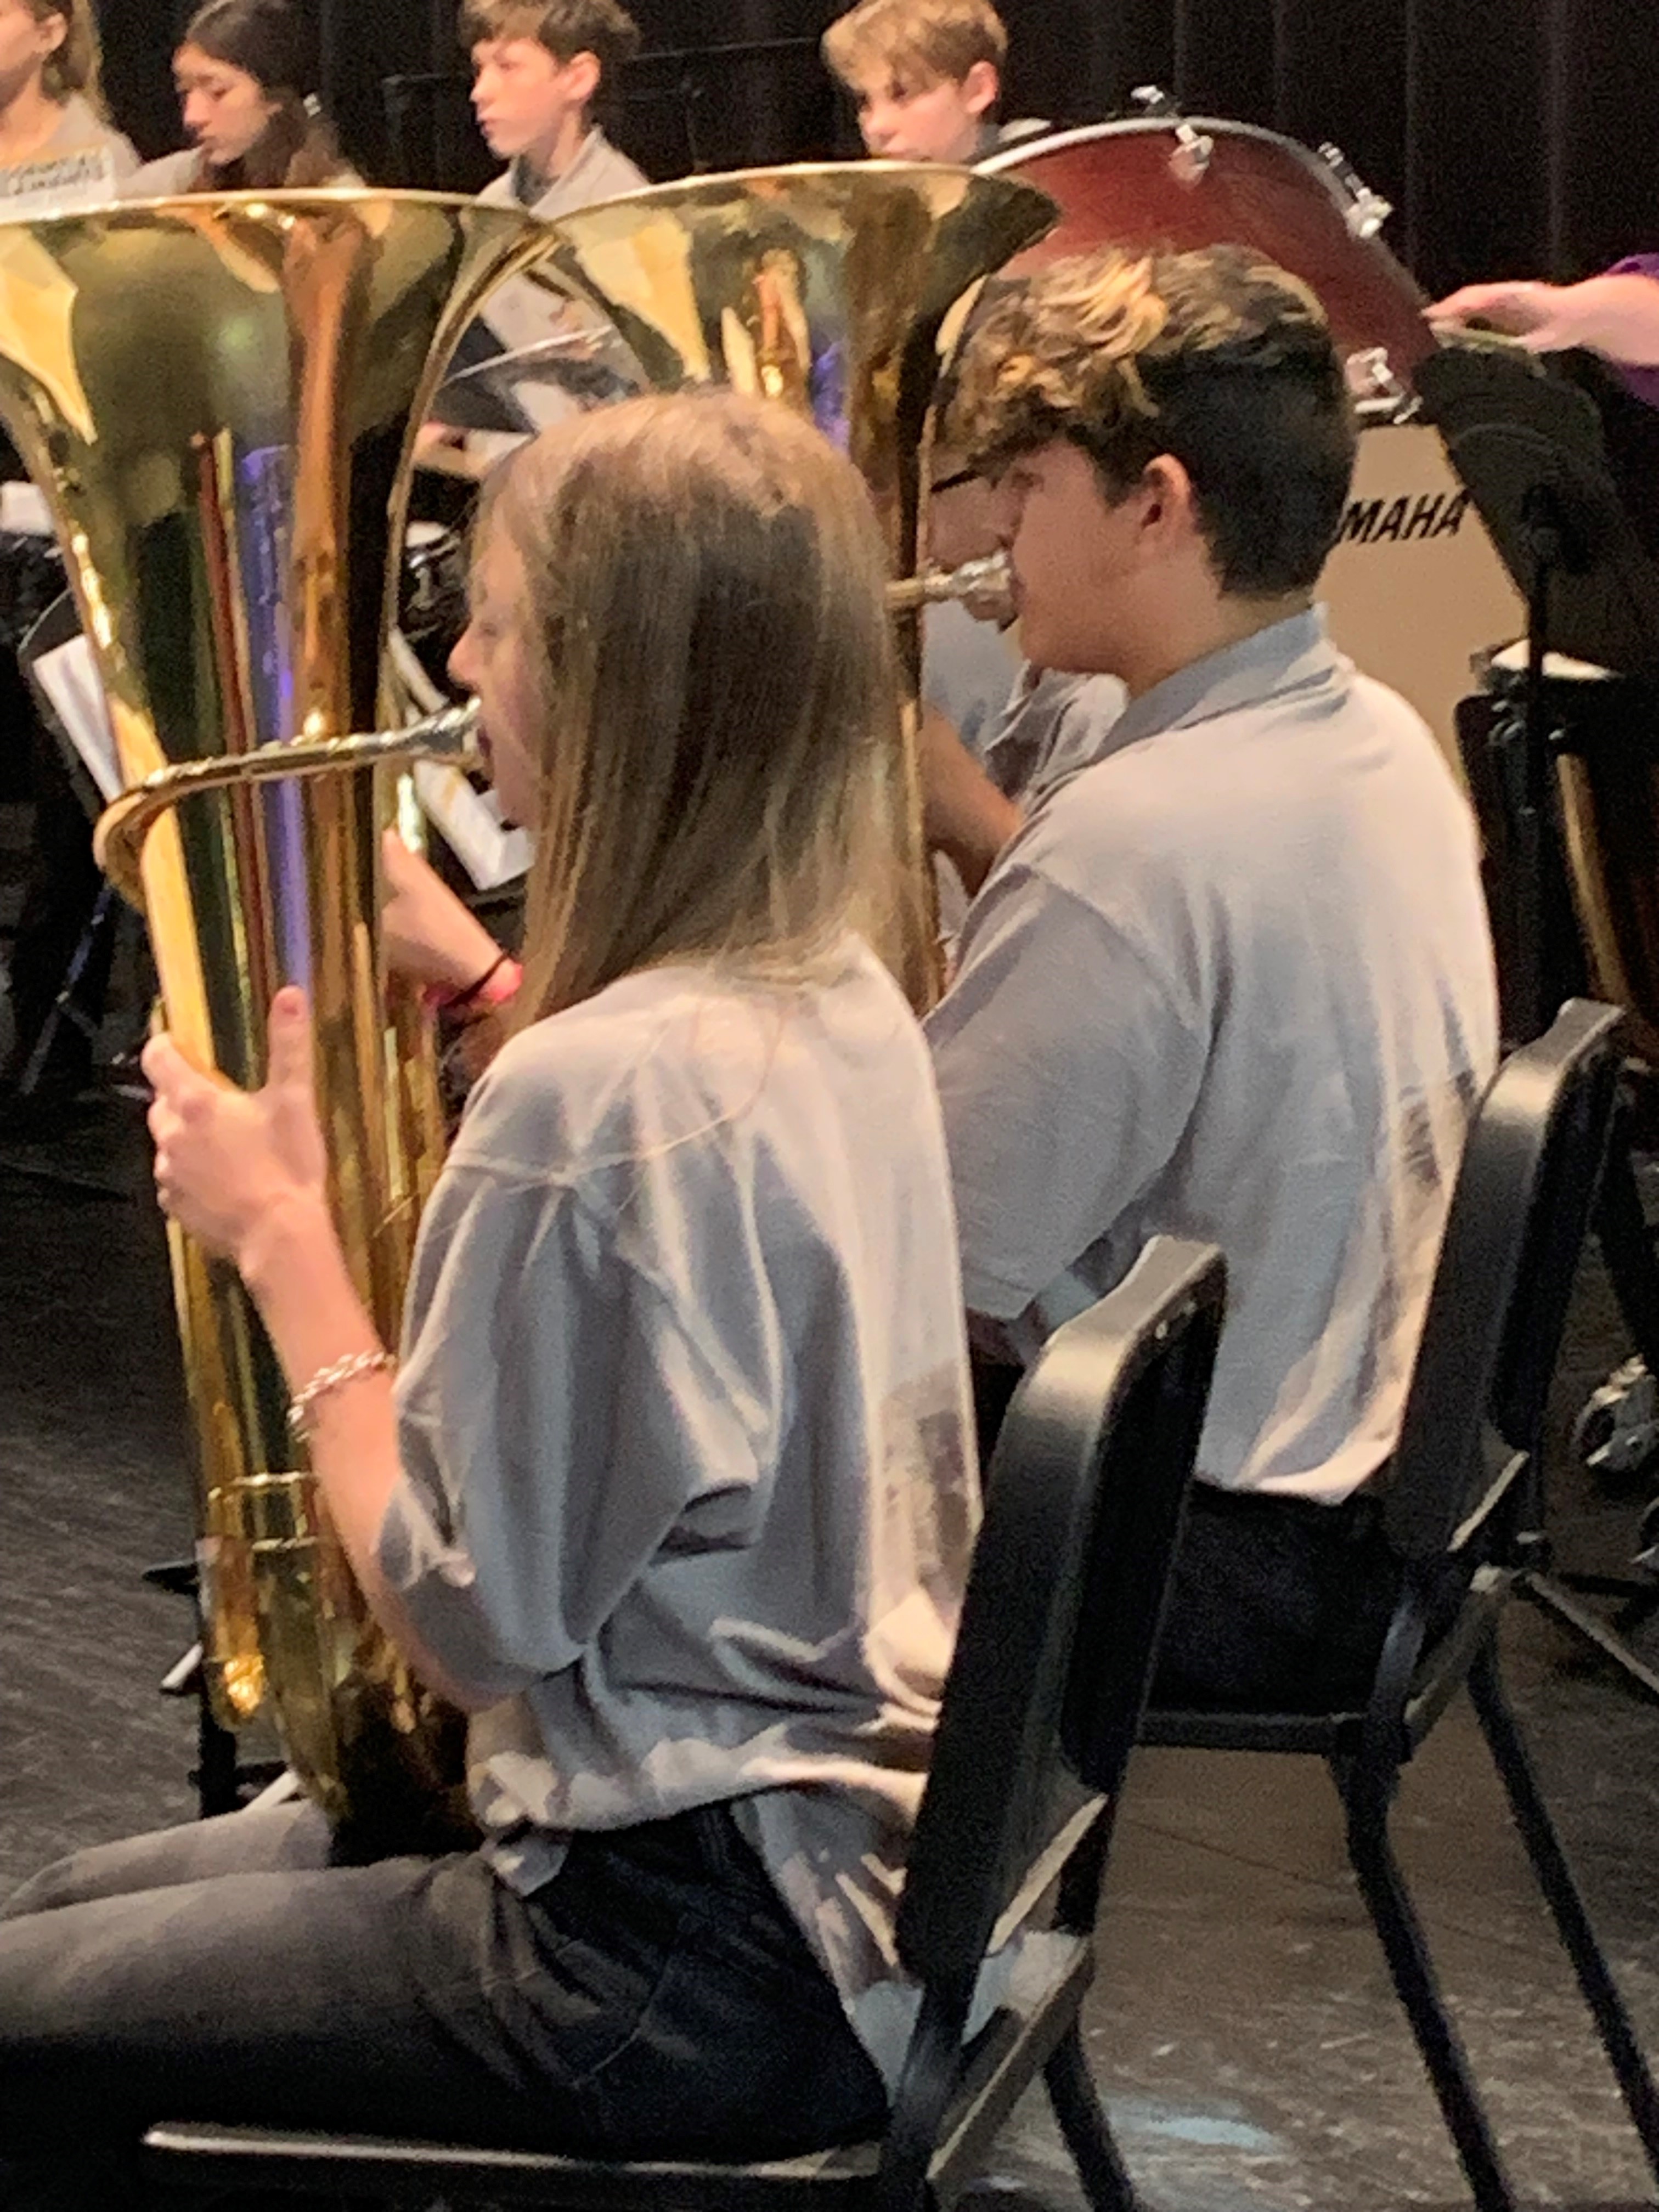 Sofia Bagley and Tiago DeLuna warming up before their concert performance